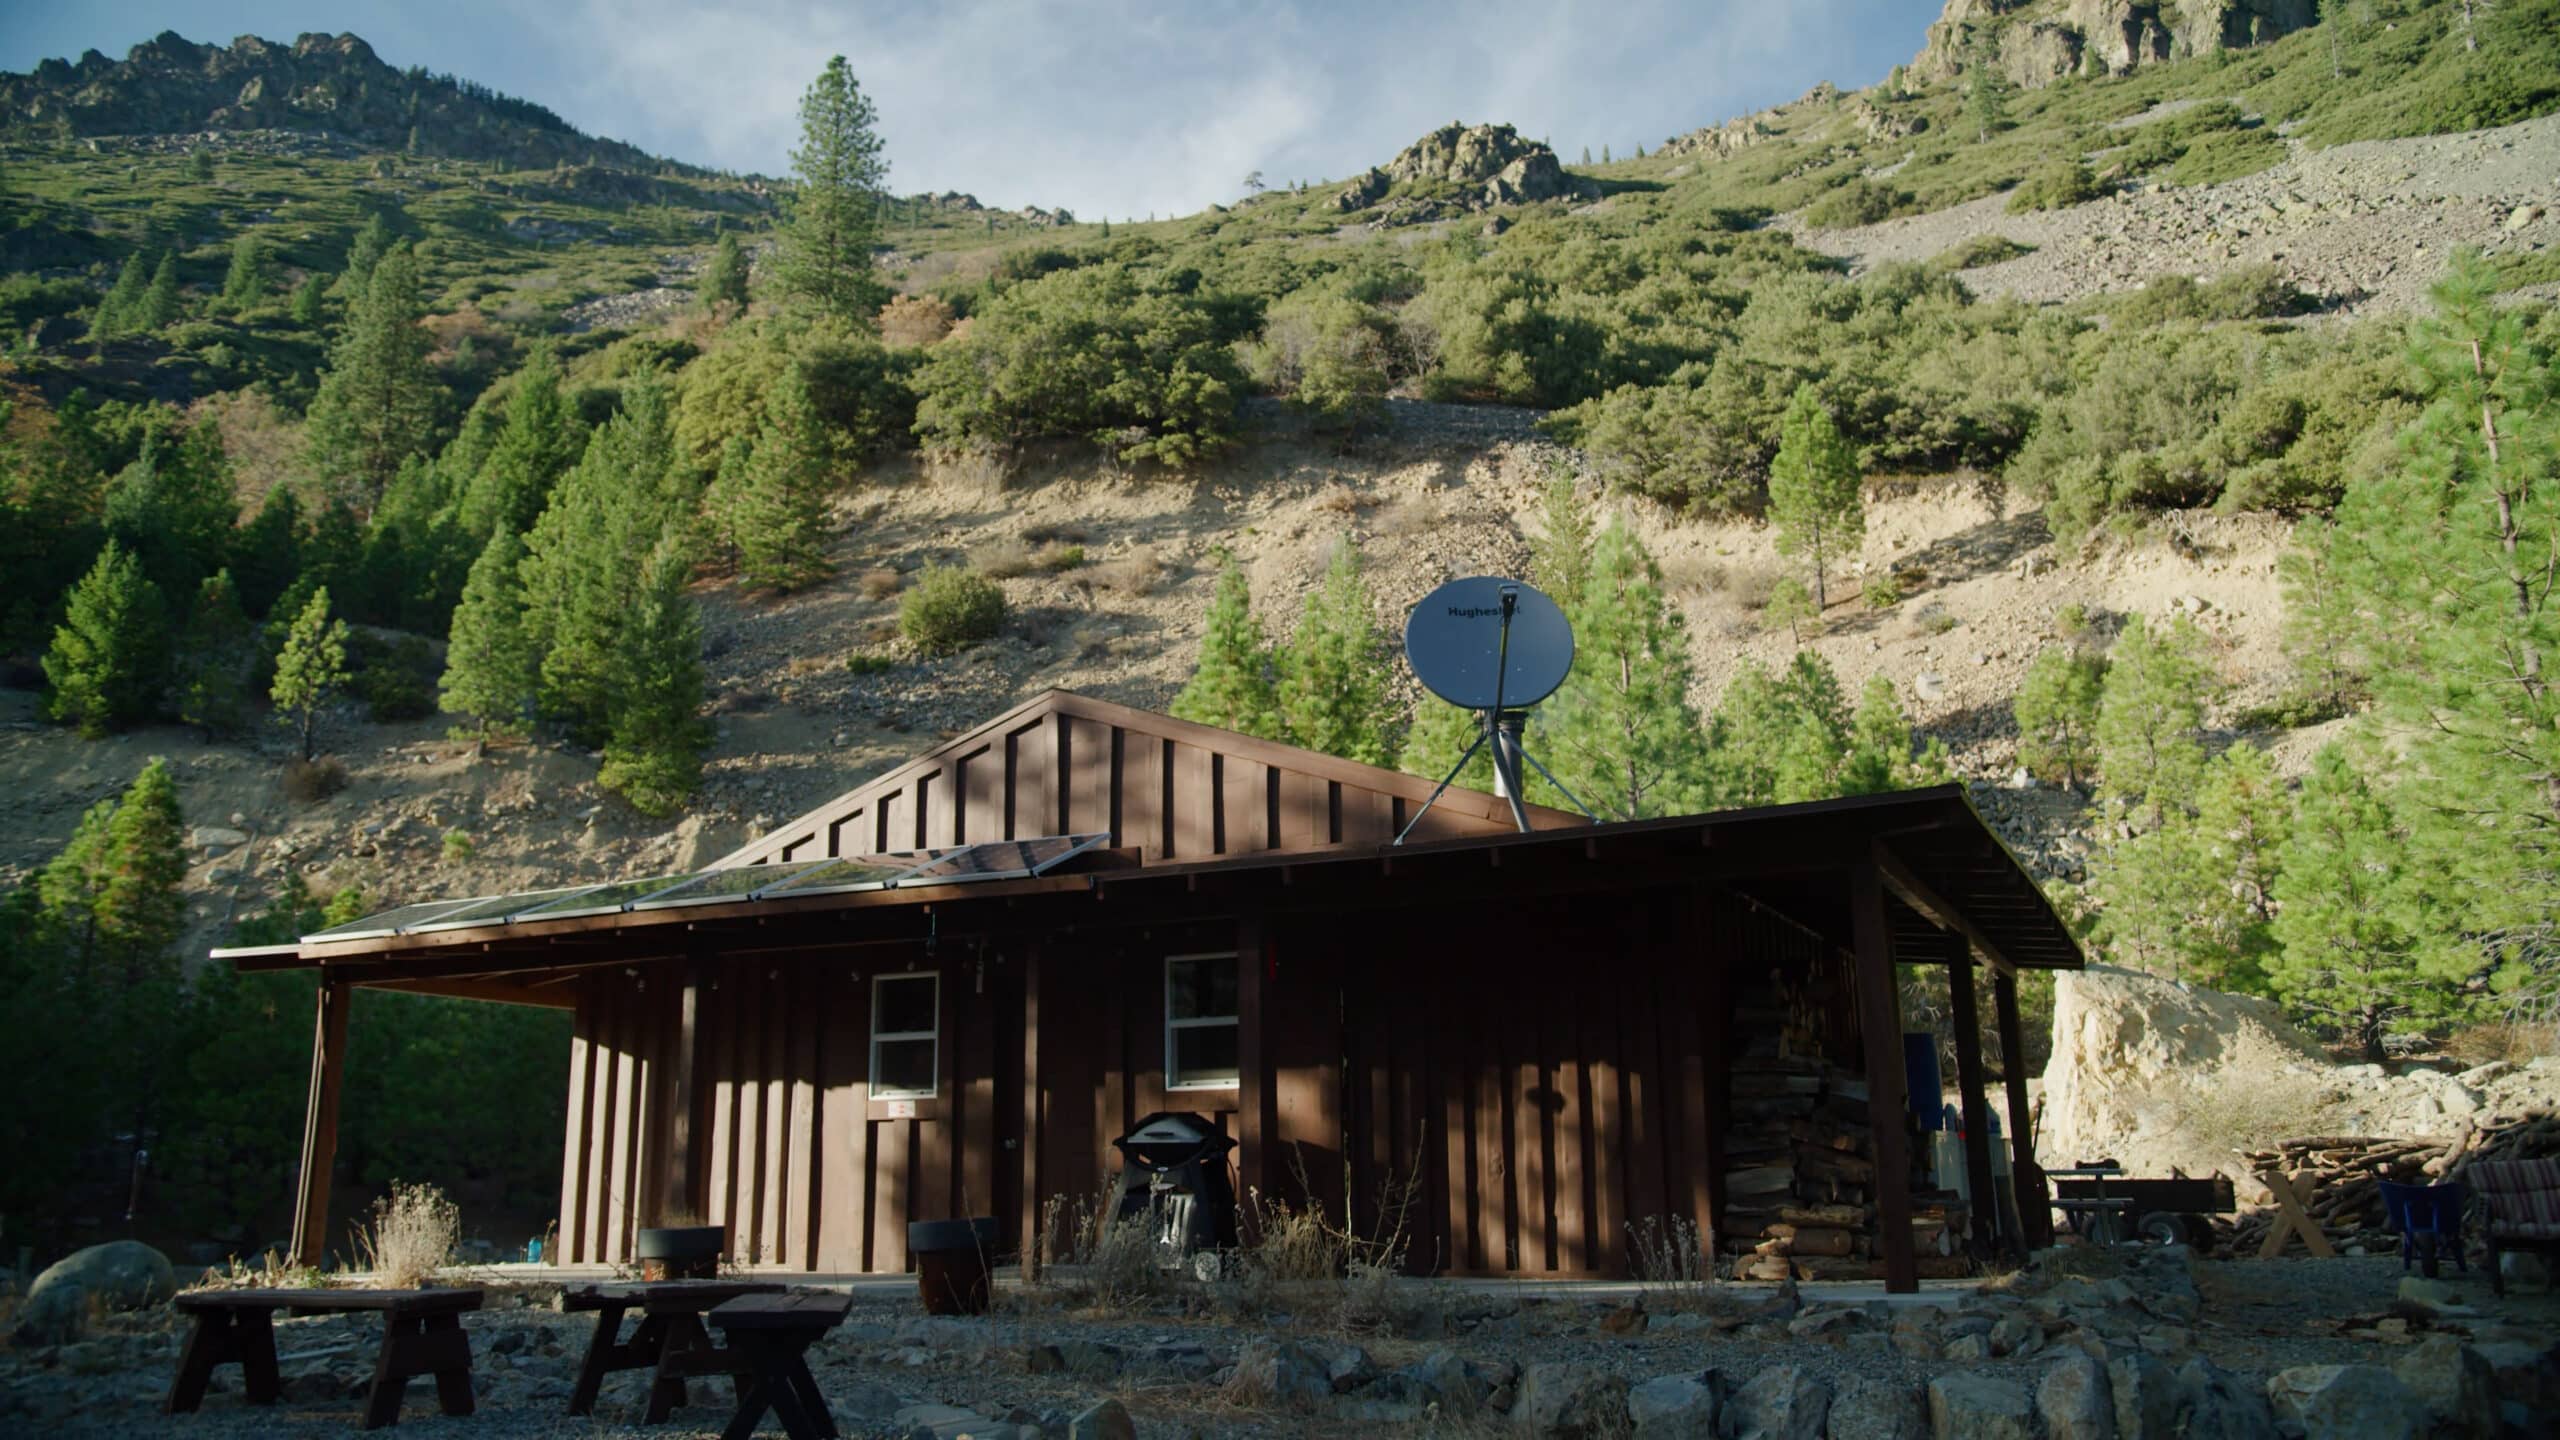 Battle Born Batteries: An off-grid cabin sits in the foothill of the sierras, powered by Dragonfly Energy and Battle Born lithium ion batteries